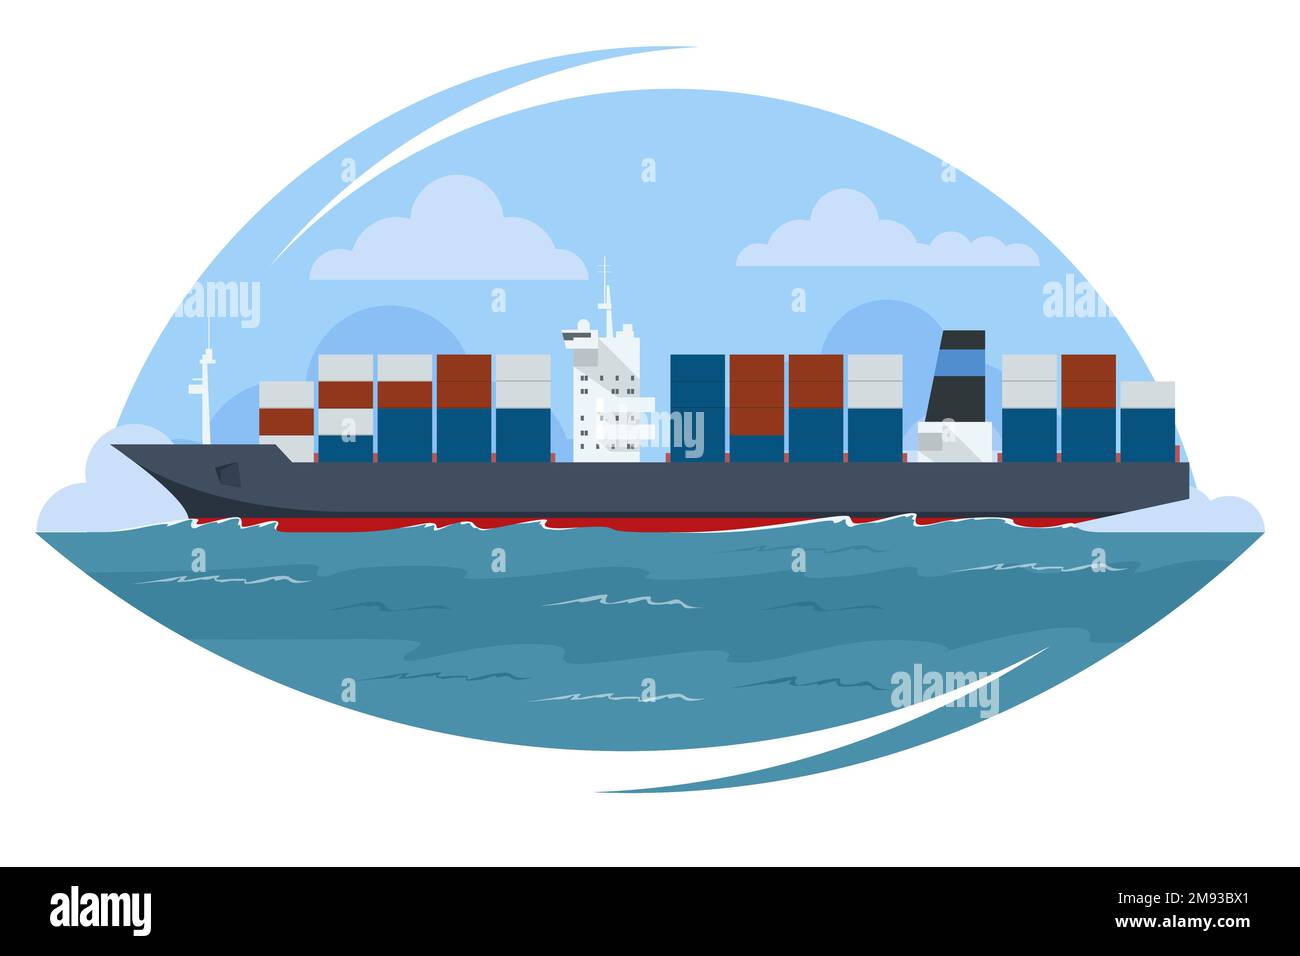 Sea freight concept. Delivery and logistics. Cargo logistics container import export freight ship Stock Vector